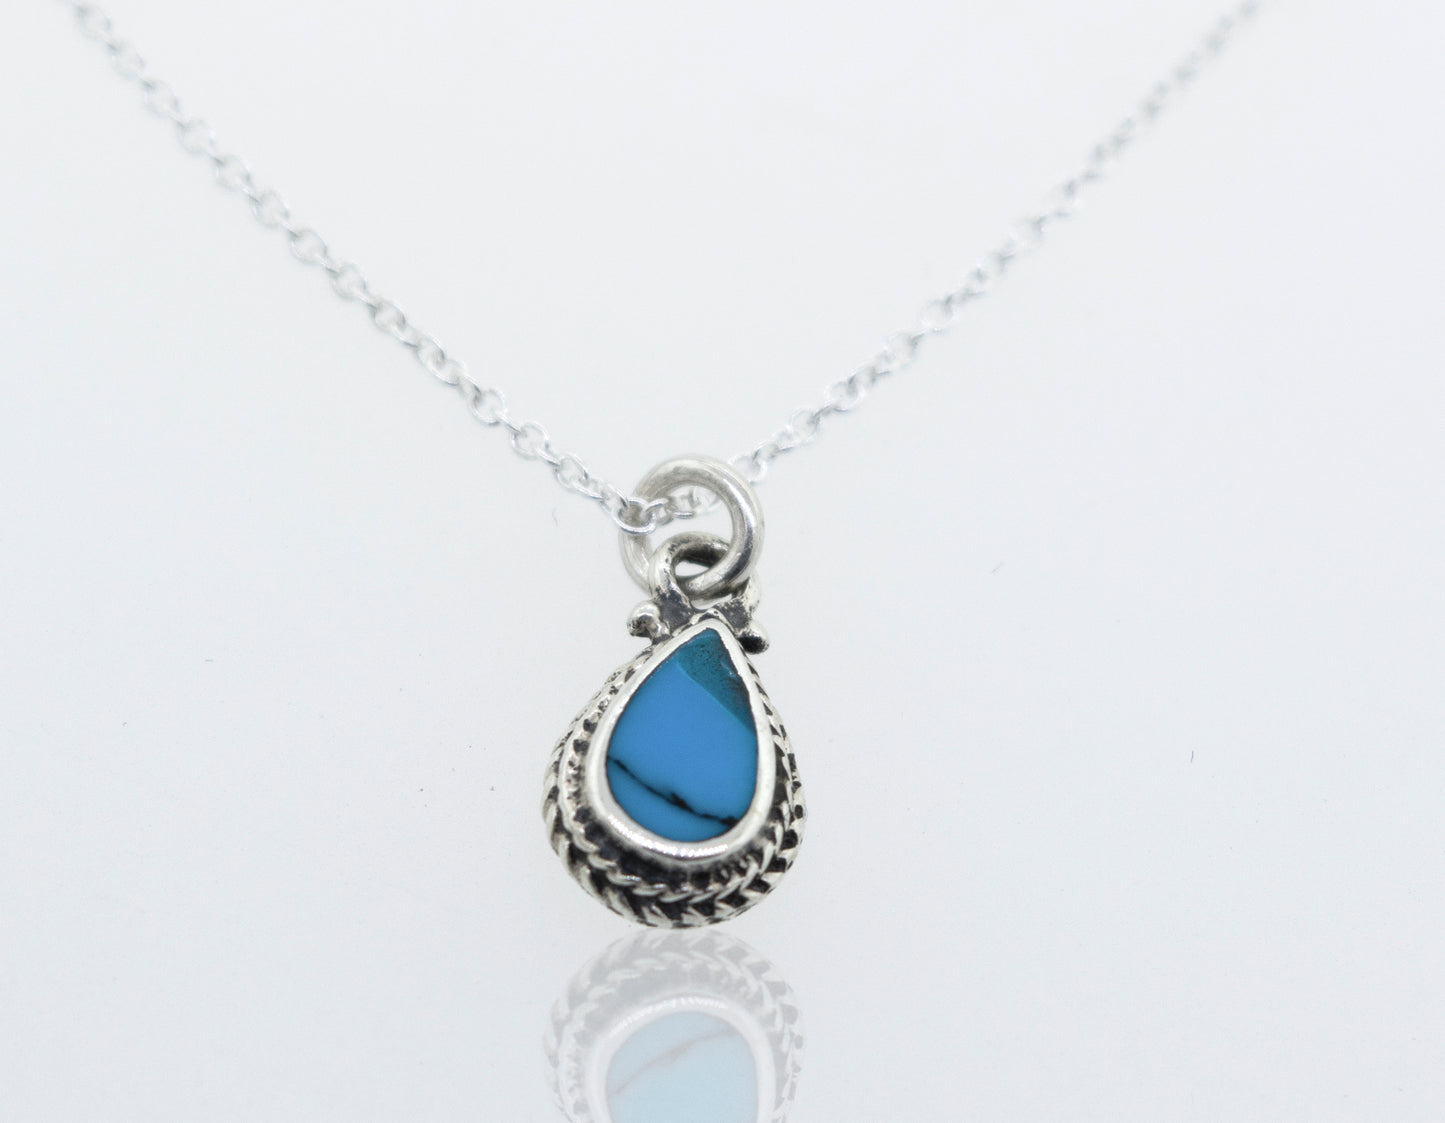 A Super Silver Blue Turquoise Teardrop Necklace with a 18" chain and a small teardrop pendant featuring a blue turquoise stone.